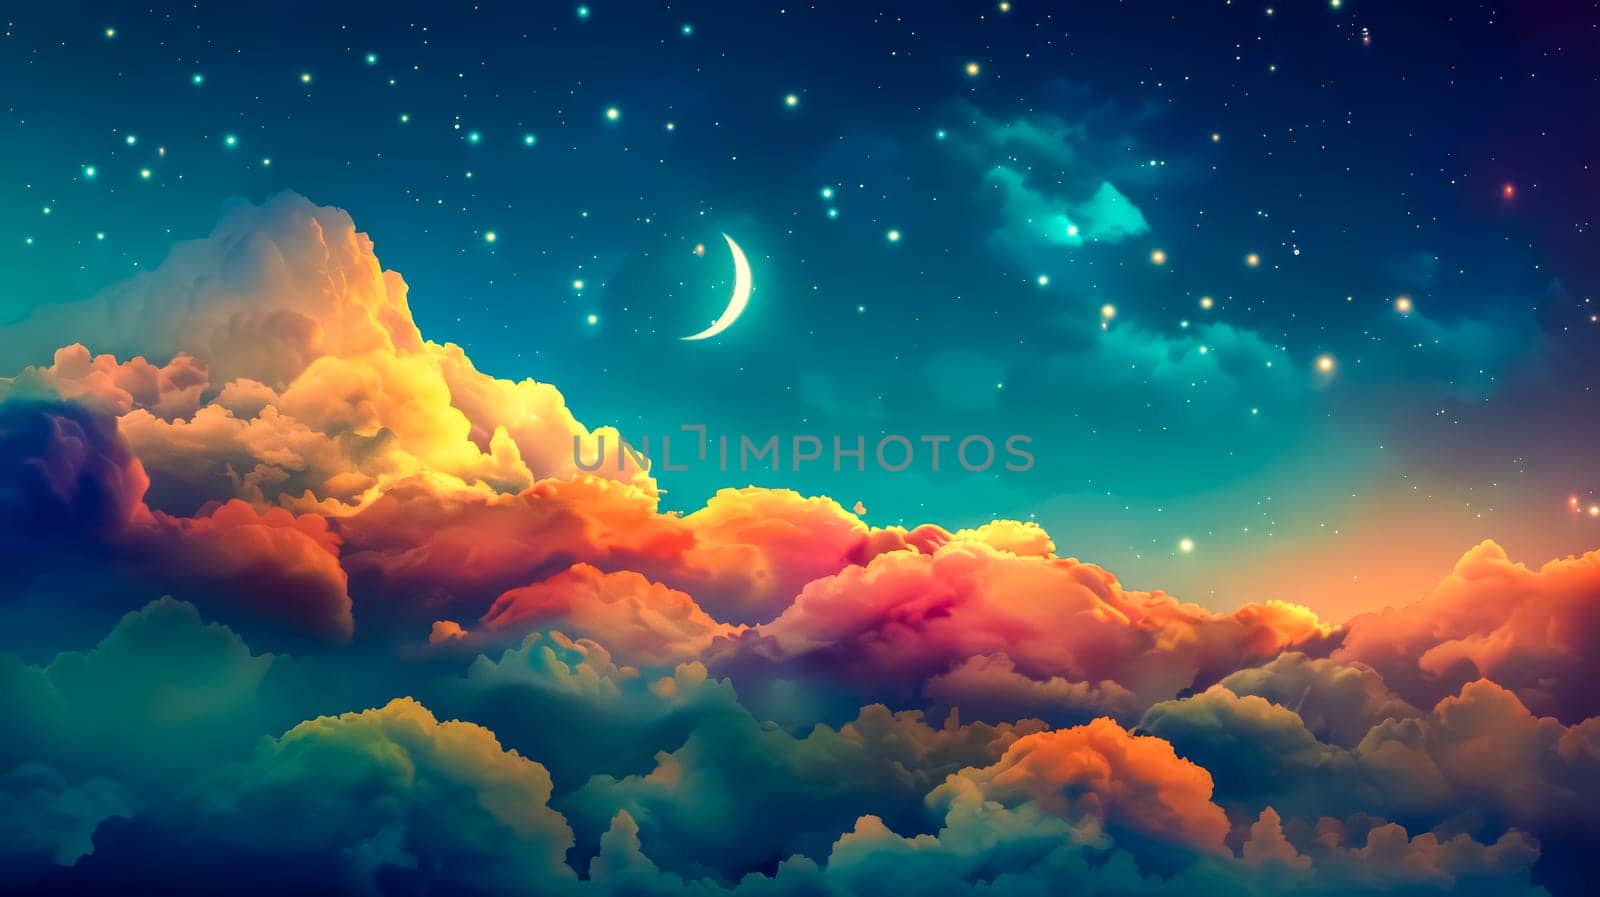 Fantasy sky scene with vivid clouds, shining stars, and a crescent moon evokes wonder